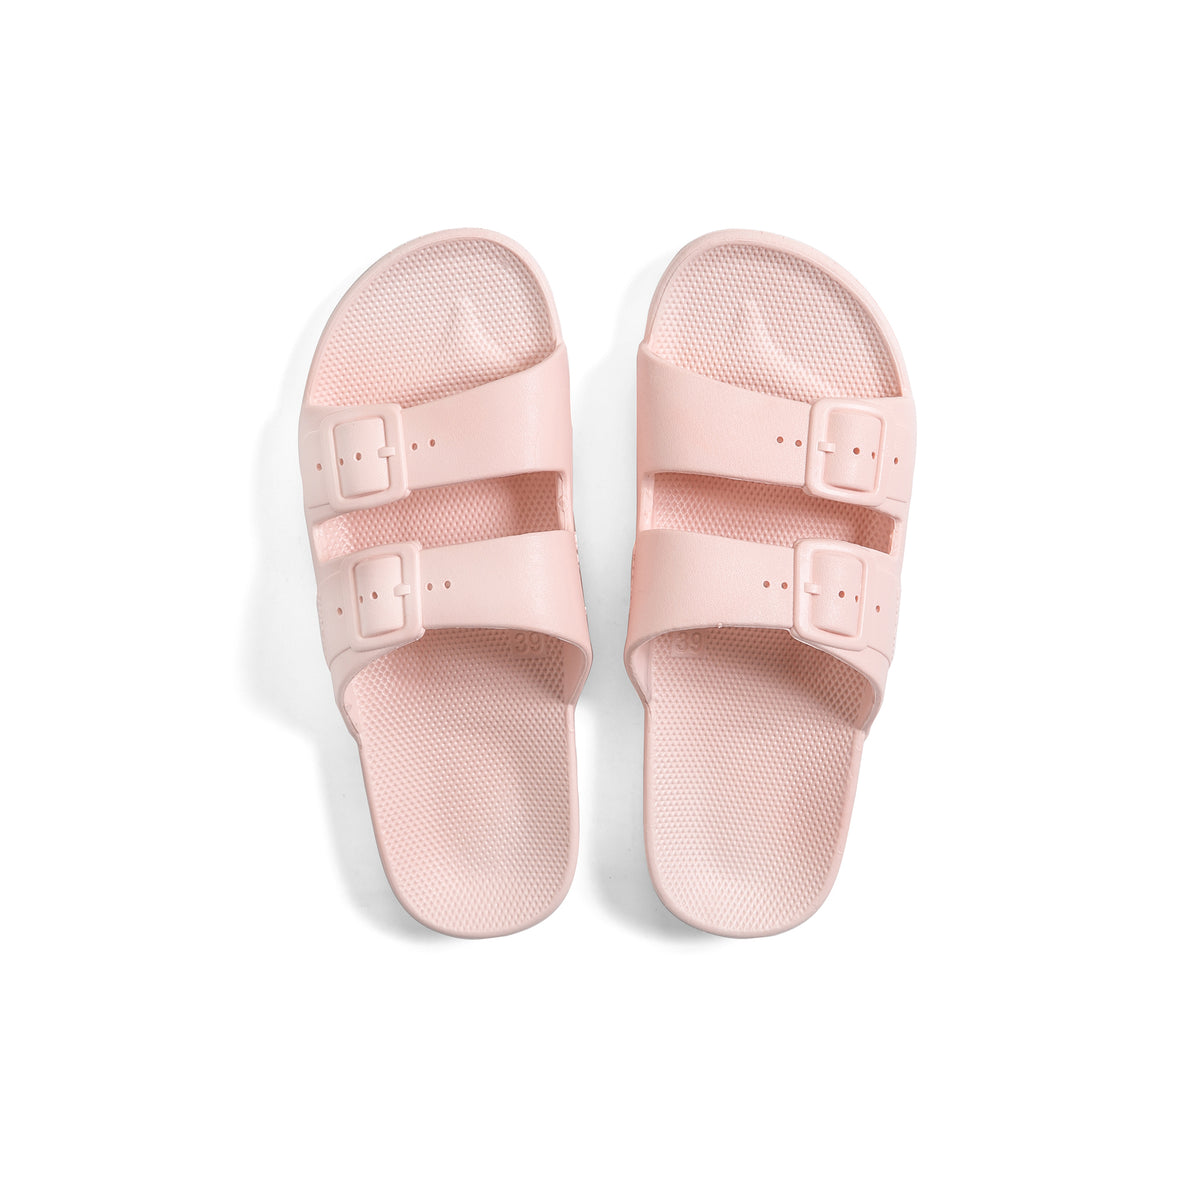 Parallel Culture Shoes and Fashion Online SLIDES FREEDOM MOSES FREEDOM MOSES SOLIDS